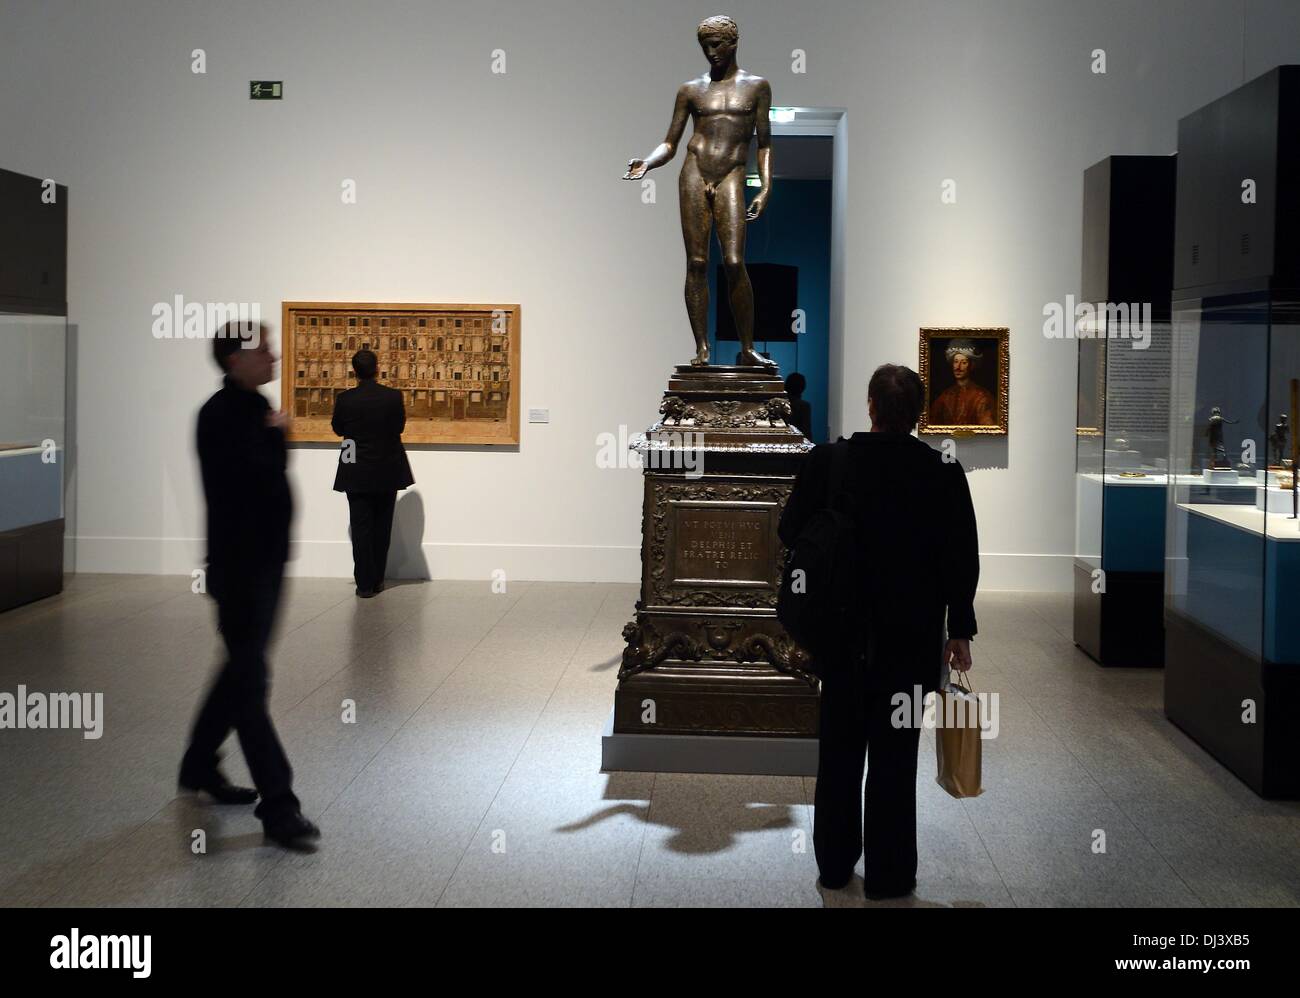 Bonn, Germany. 21st Nov, 2013. The sculpture 'Socalled Idolino of Pesaro' (Bronze, 30 BC) is on display in the exhibition 'Villa Romana 1905-2013 The Artists' House in Florence' at the Art and Exhibition Hall of the Federal Republic of Germany in Bonn, Germany, 21 November 2013. The exhibition runs from 22 November 2013 until 09 March 2014. Photo: HENNING KAISER/dpa/Alamy Live News Stock Photo